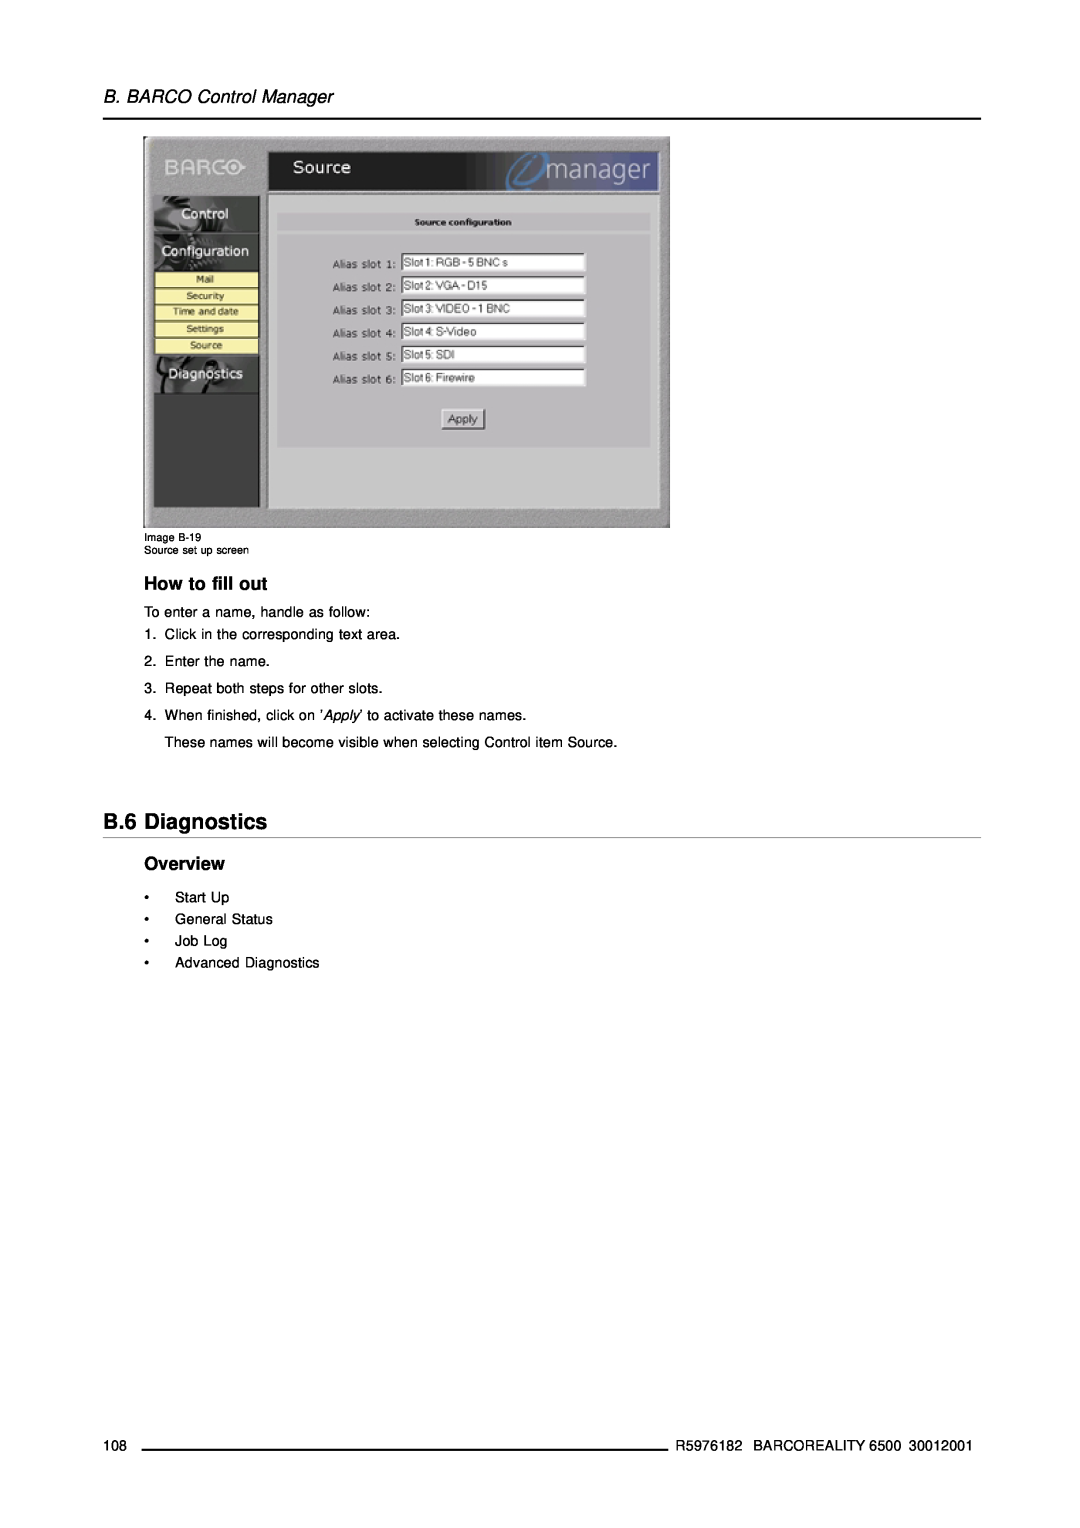 Barco R9001960 B.6 Diagnostics, How to fill out, B. BARCO Control Manager, Overview, Image B-19 Source set up screen 